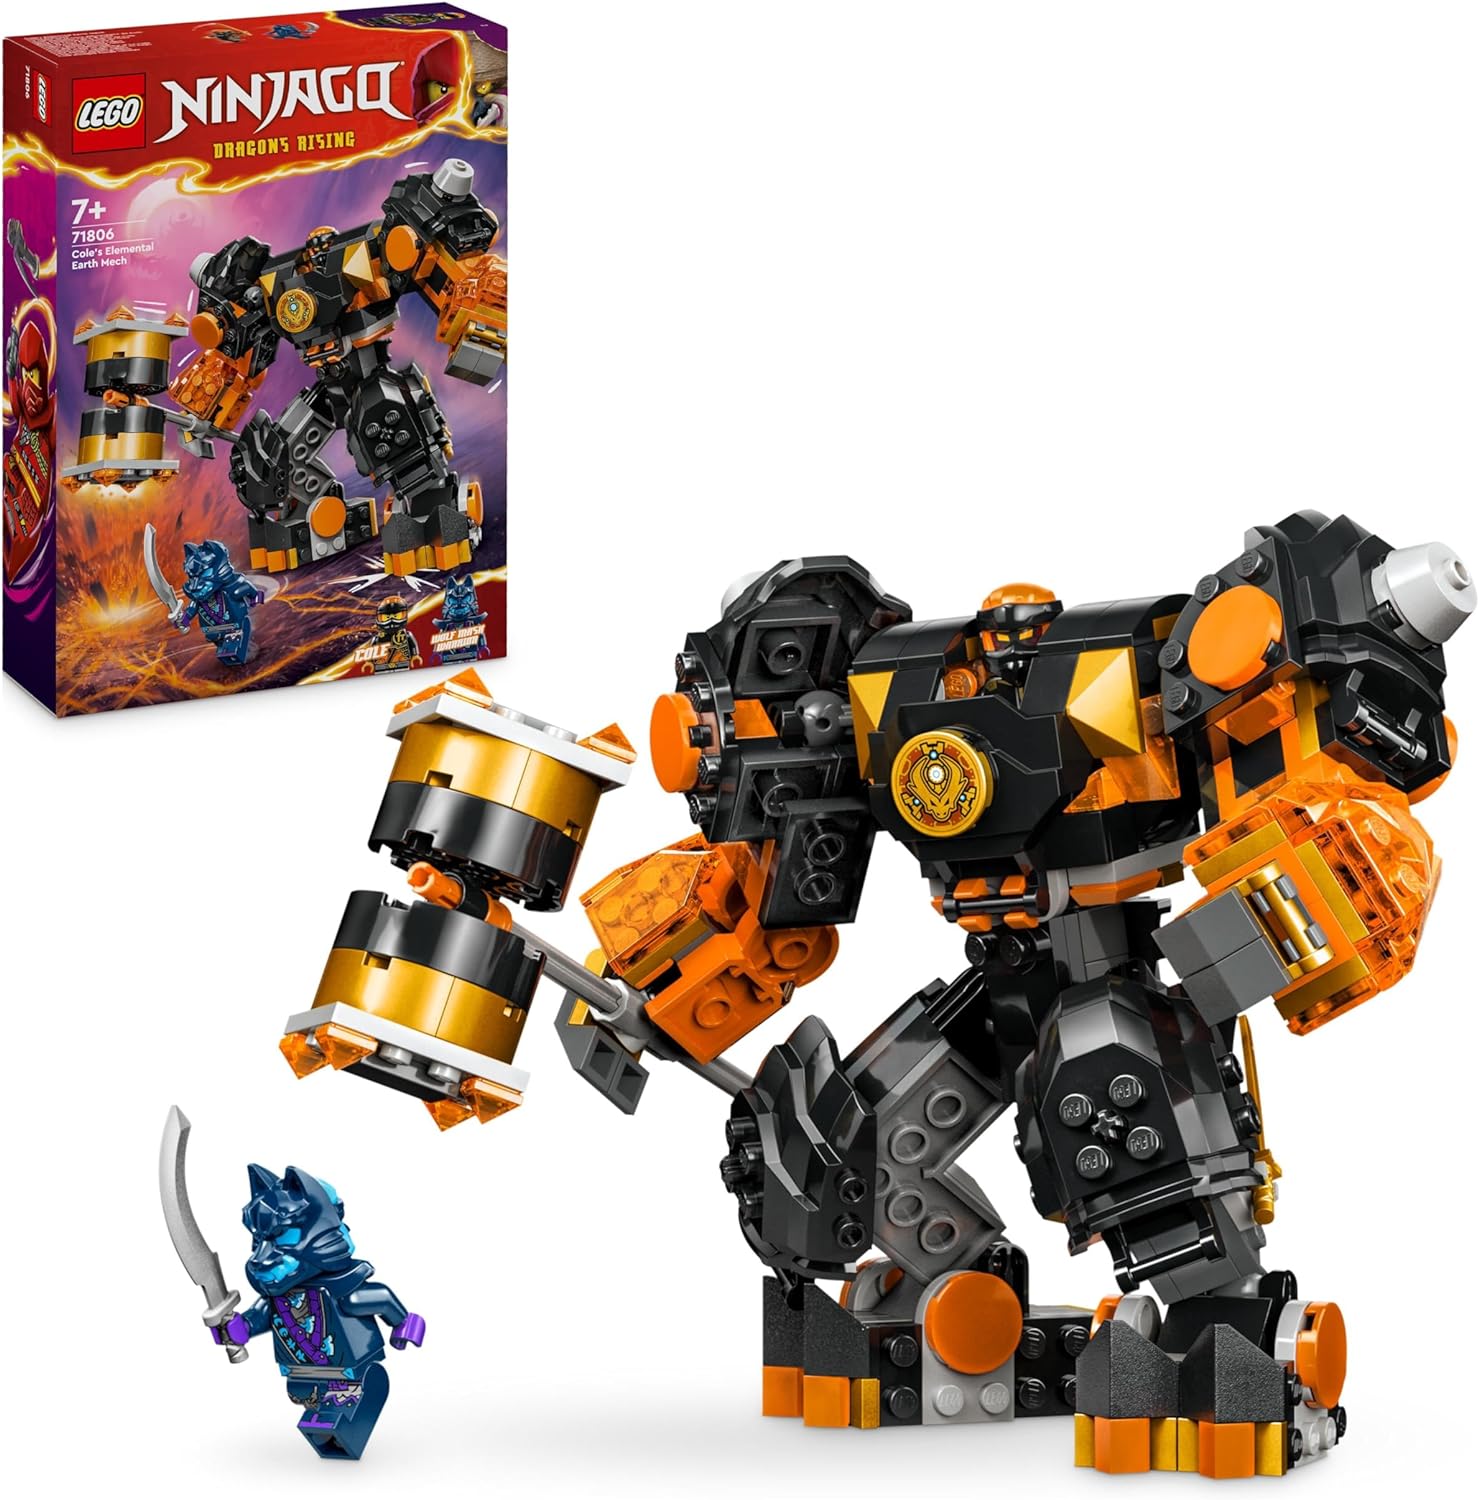 LEGO Ninjago Coles Erdmech Action Figure Toy with Changeable Mech, Ninja Set with 2 Figures Including Cole, Gift for 7 Year Old Boys and Girls 71806